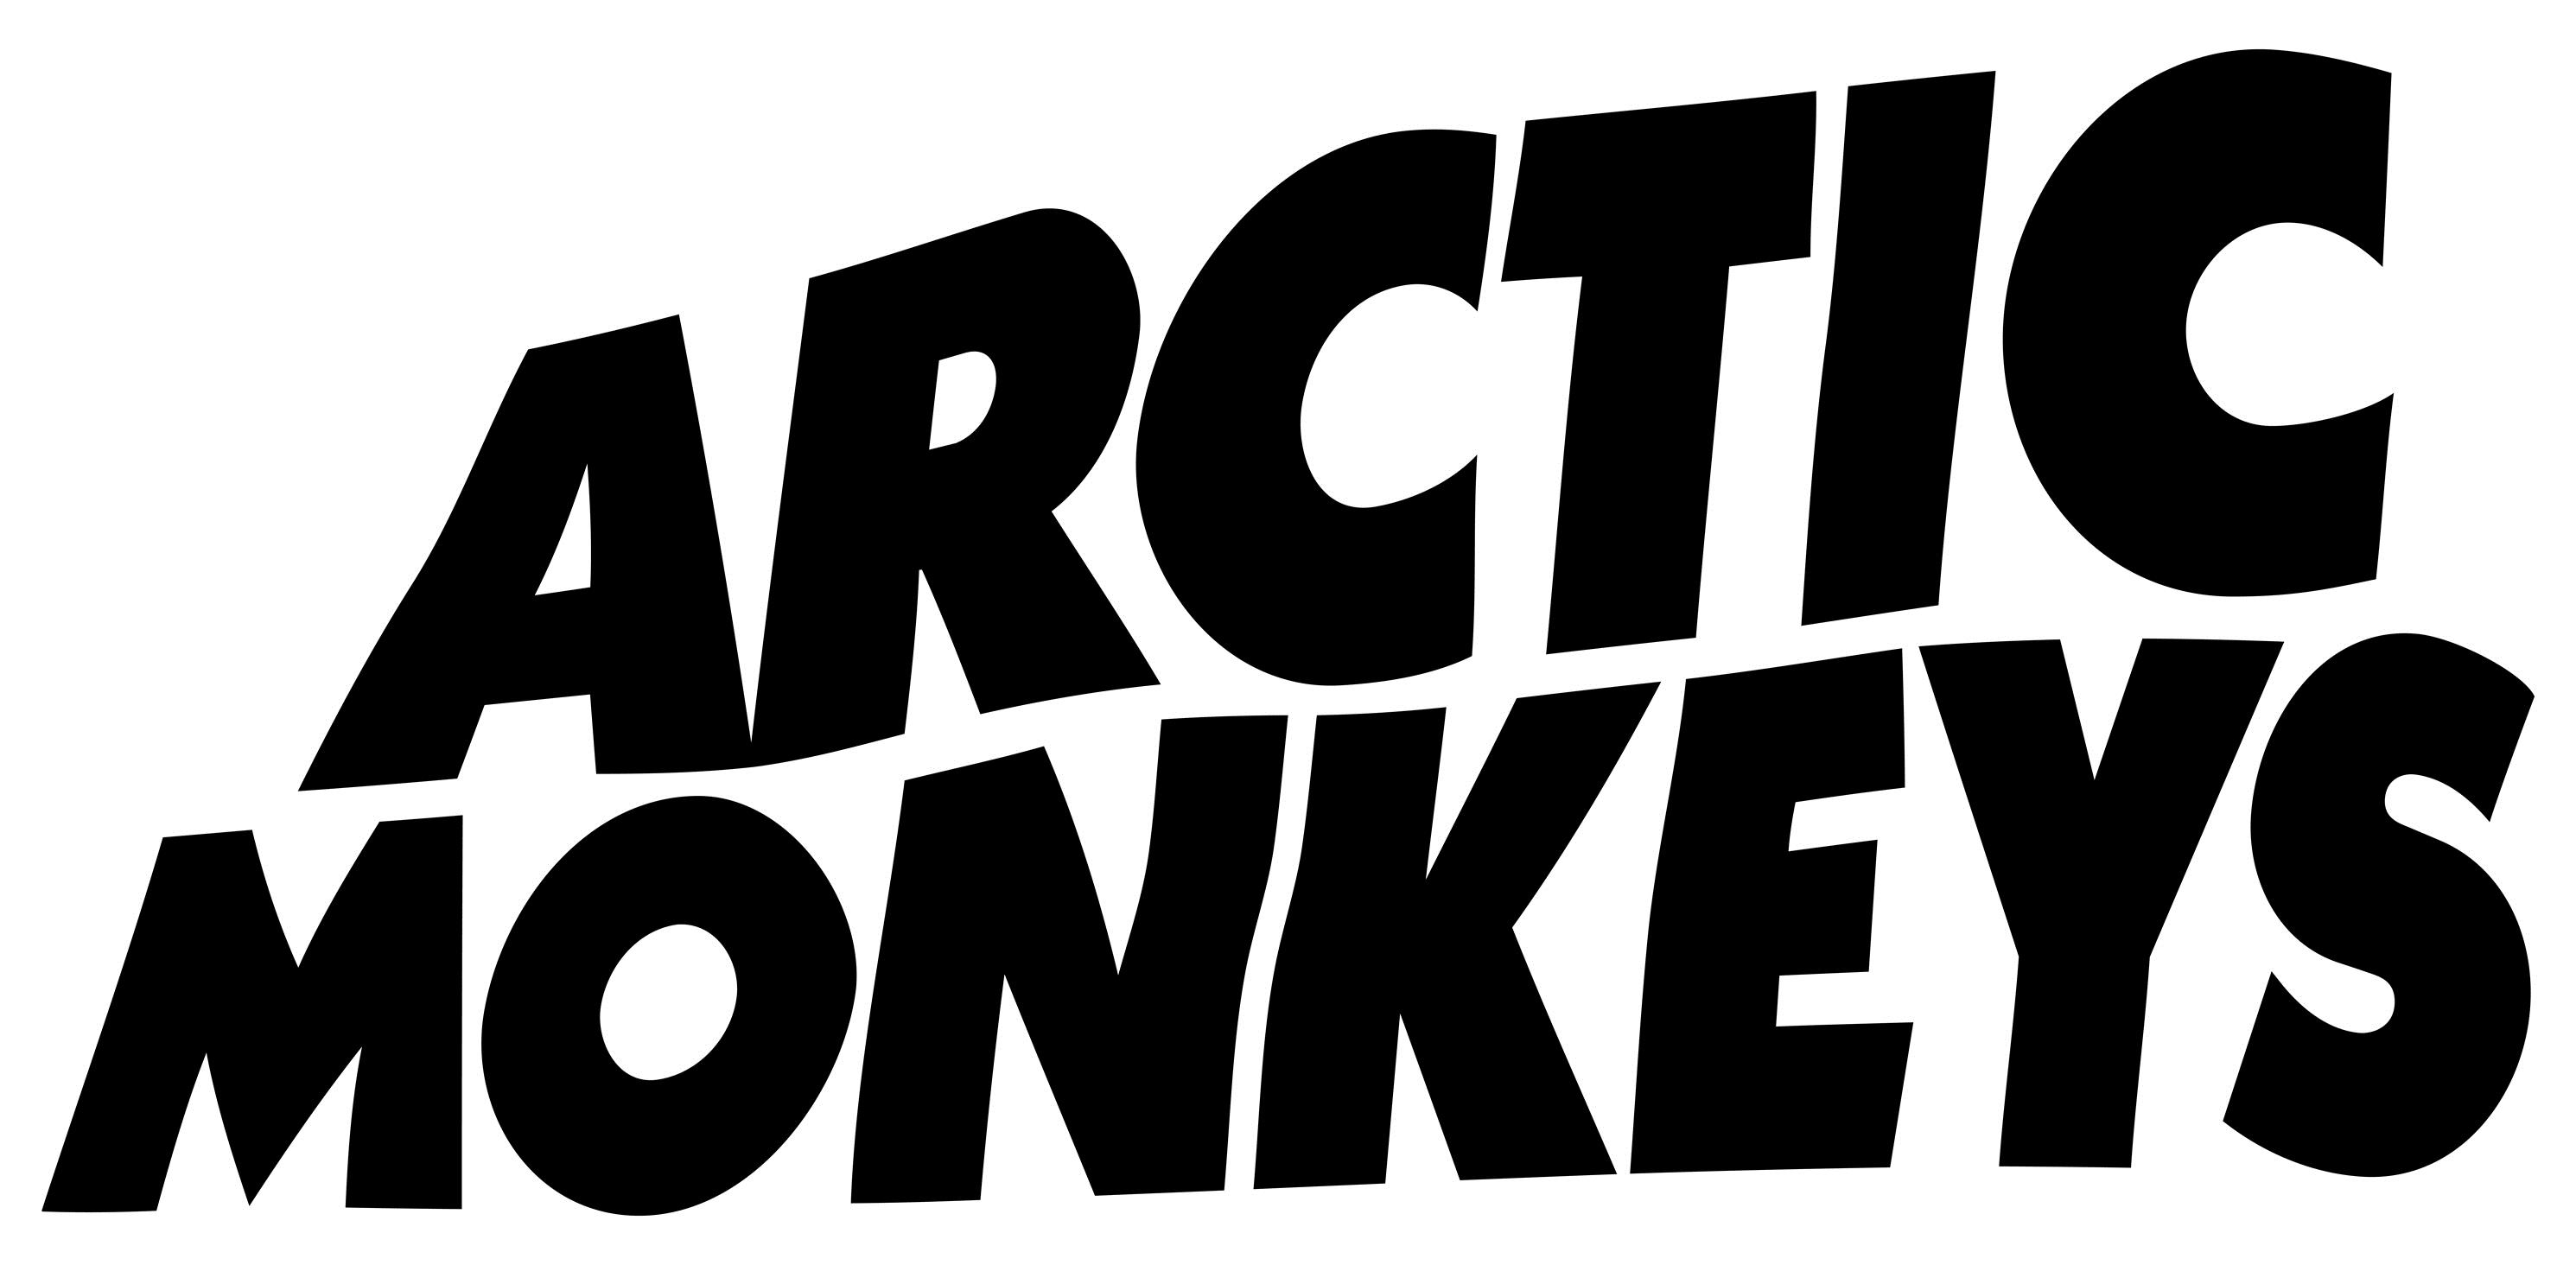 Arctic Monkeys Wallpapers Background Arctic Monkeys Logo Wallpaper Hdpng.com  - Arctic Monkeys Vector, Transparent background PNG HD thumbnail